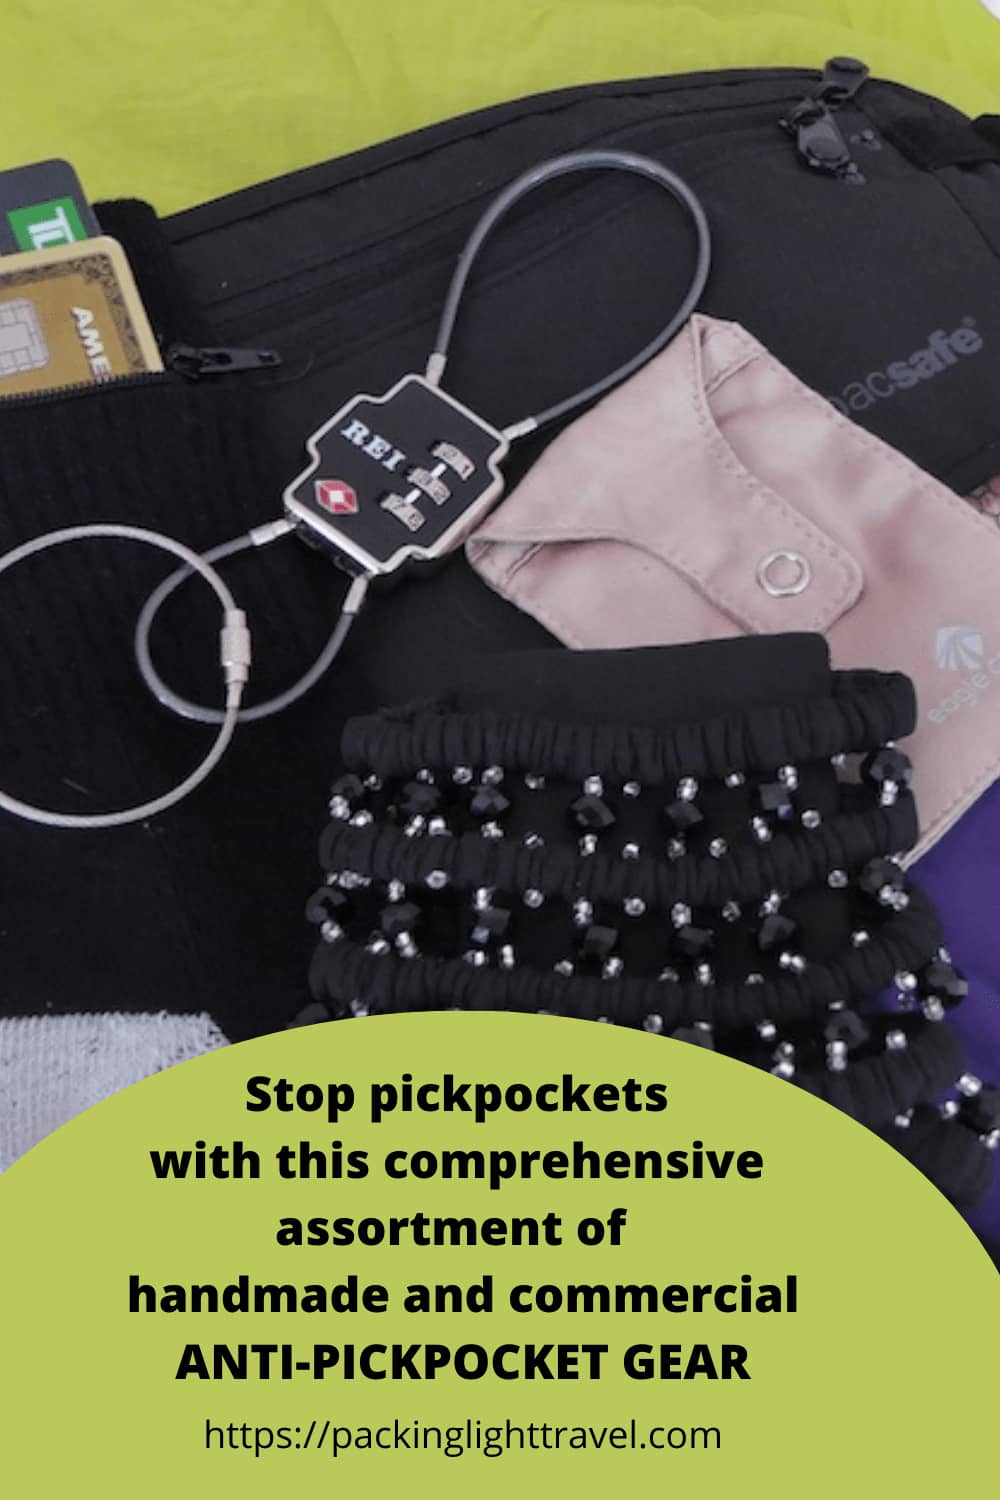 Stop pickpockets with an assortment of anti-pickpocket gear